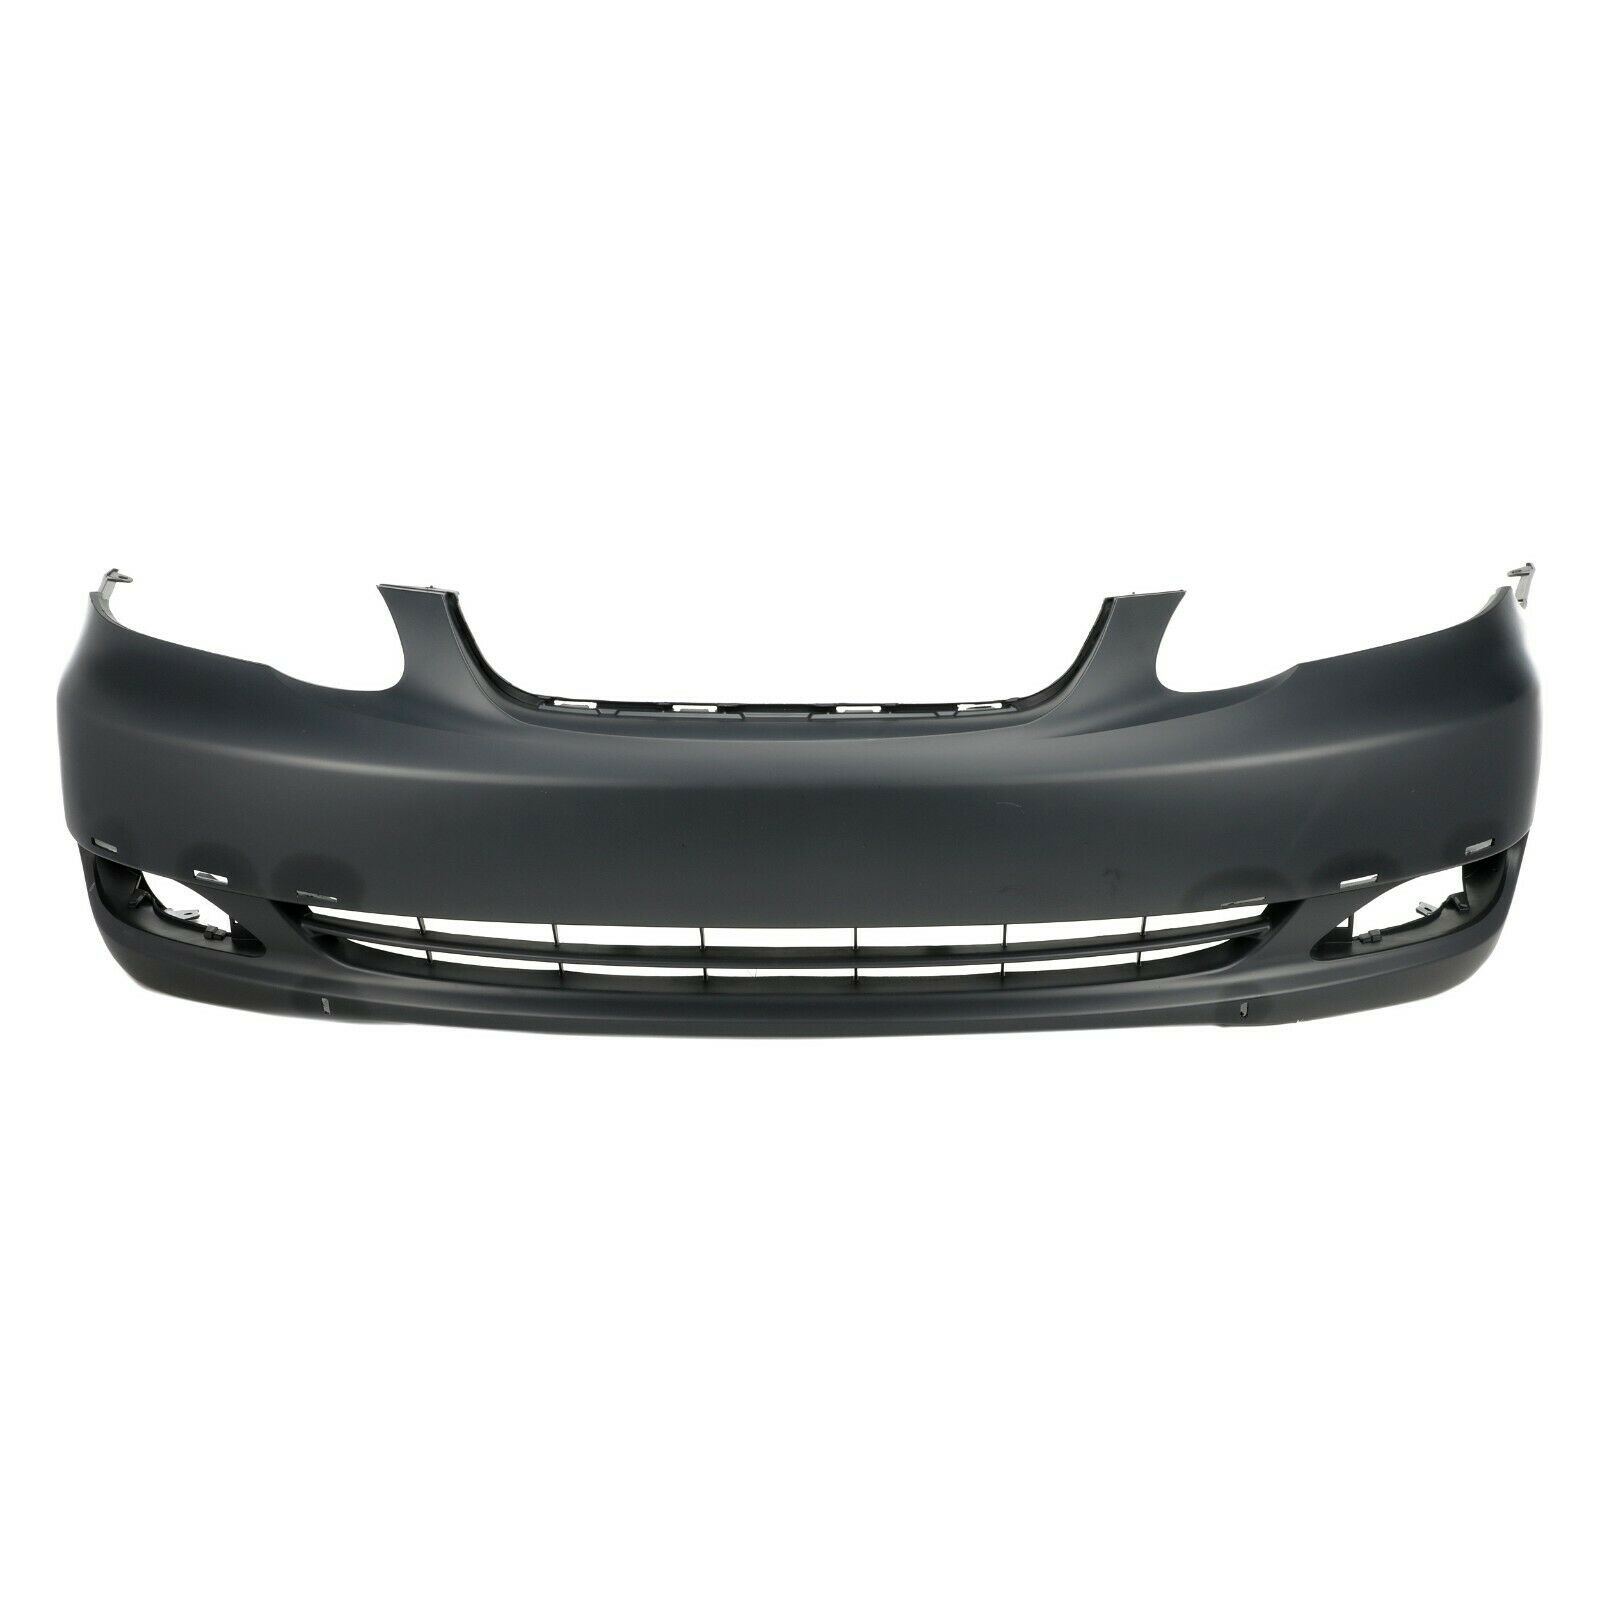 2005-2008 Toyota Corolla S Front Bumper Painted to Match